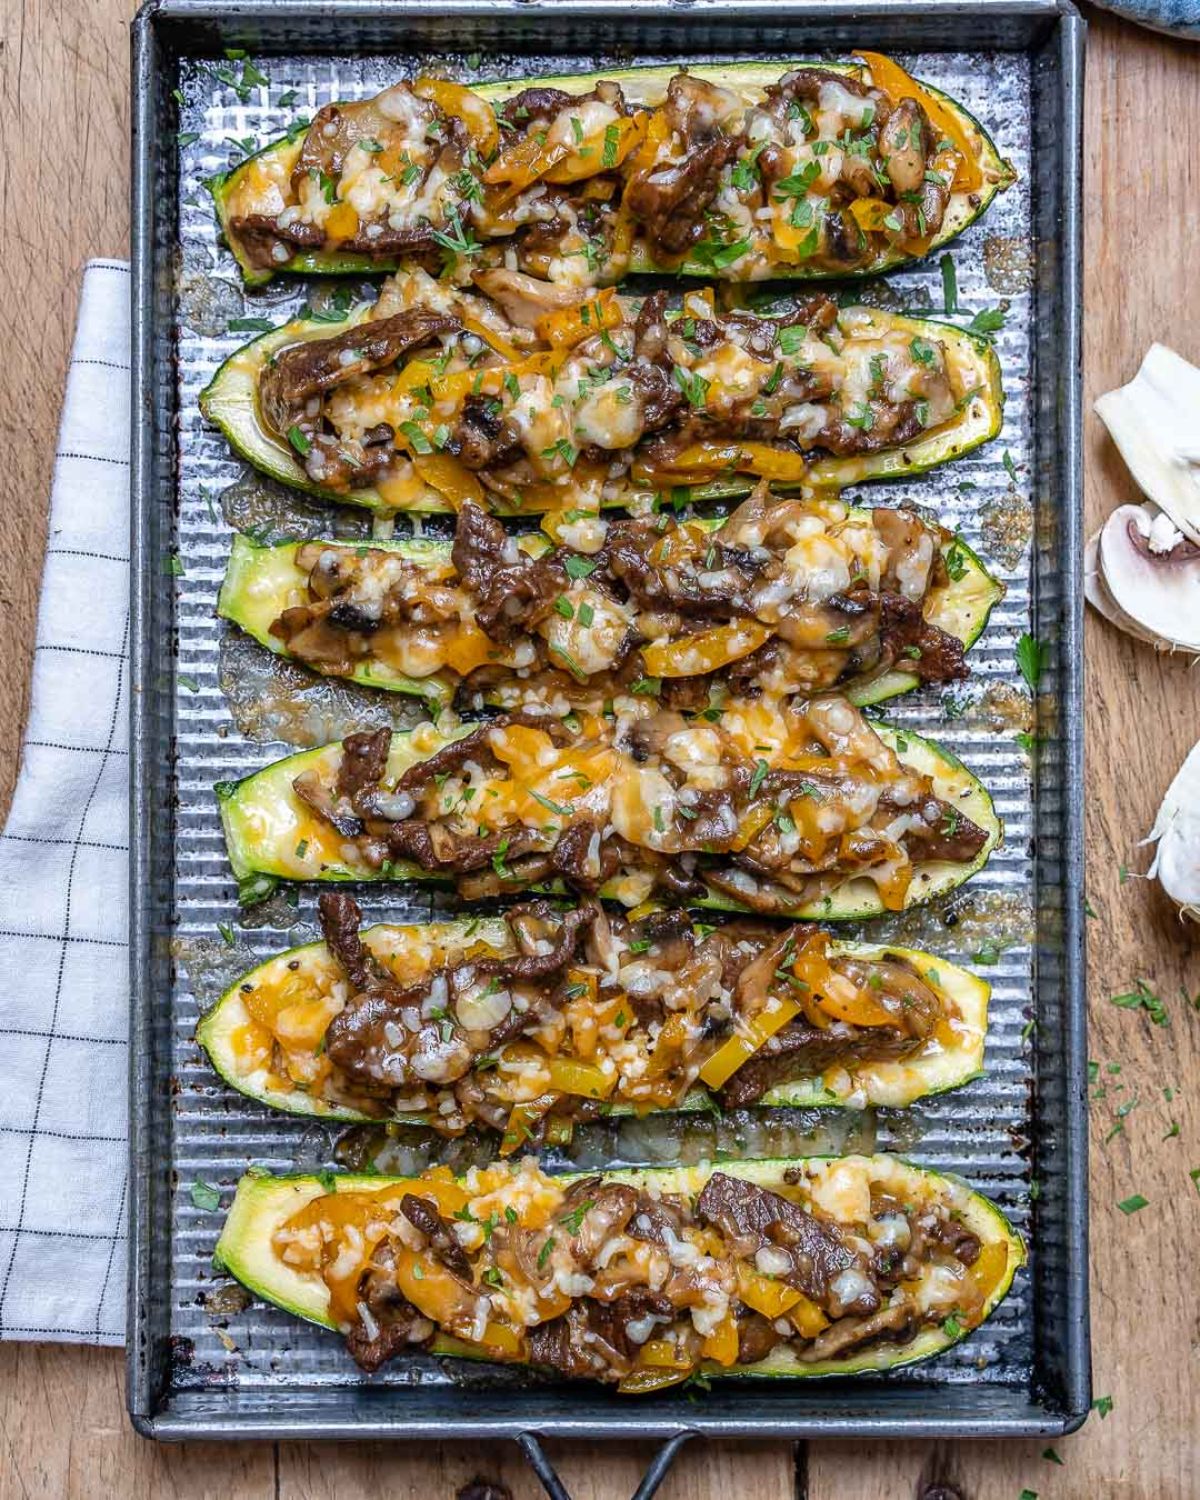 A rectabgular baking sheet sits on a wooden table. 6 zucchini halves are laid out horizontally and filled with philly cheesesteak mixture